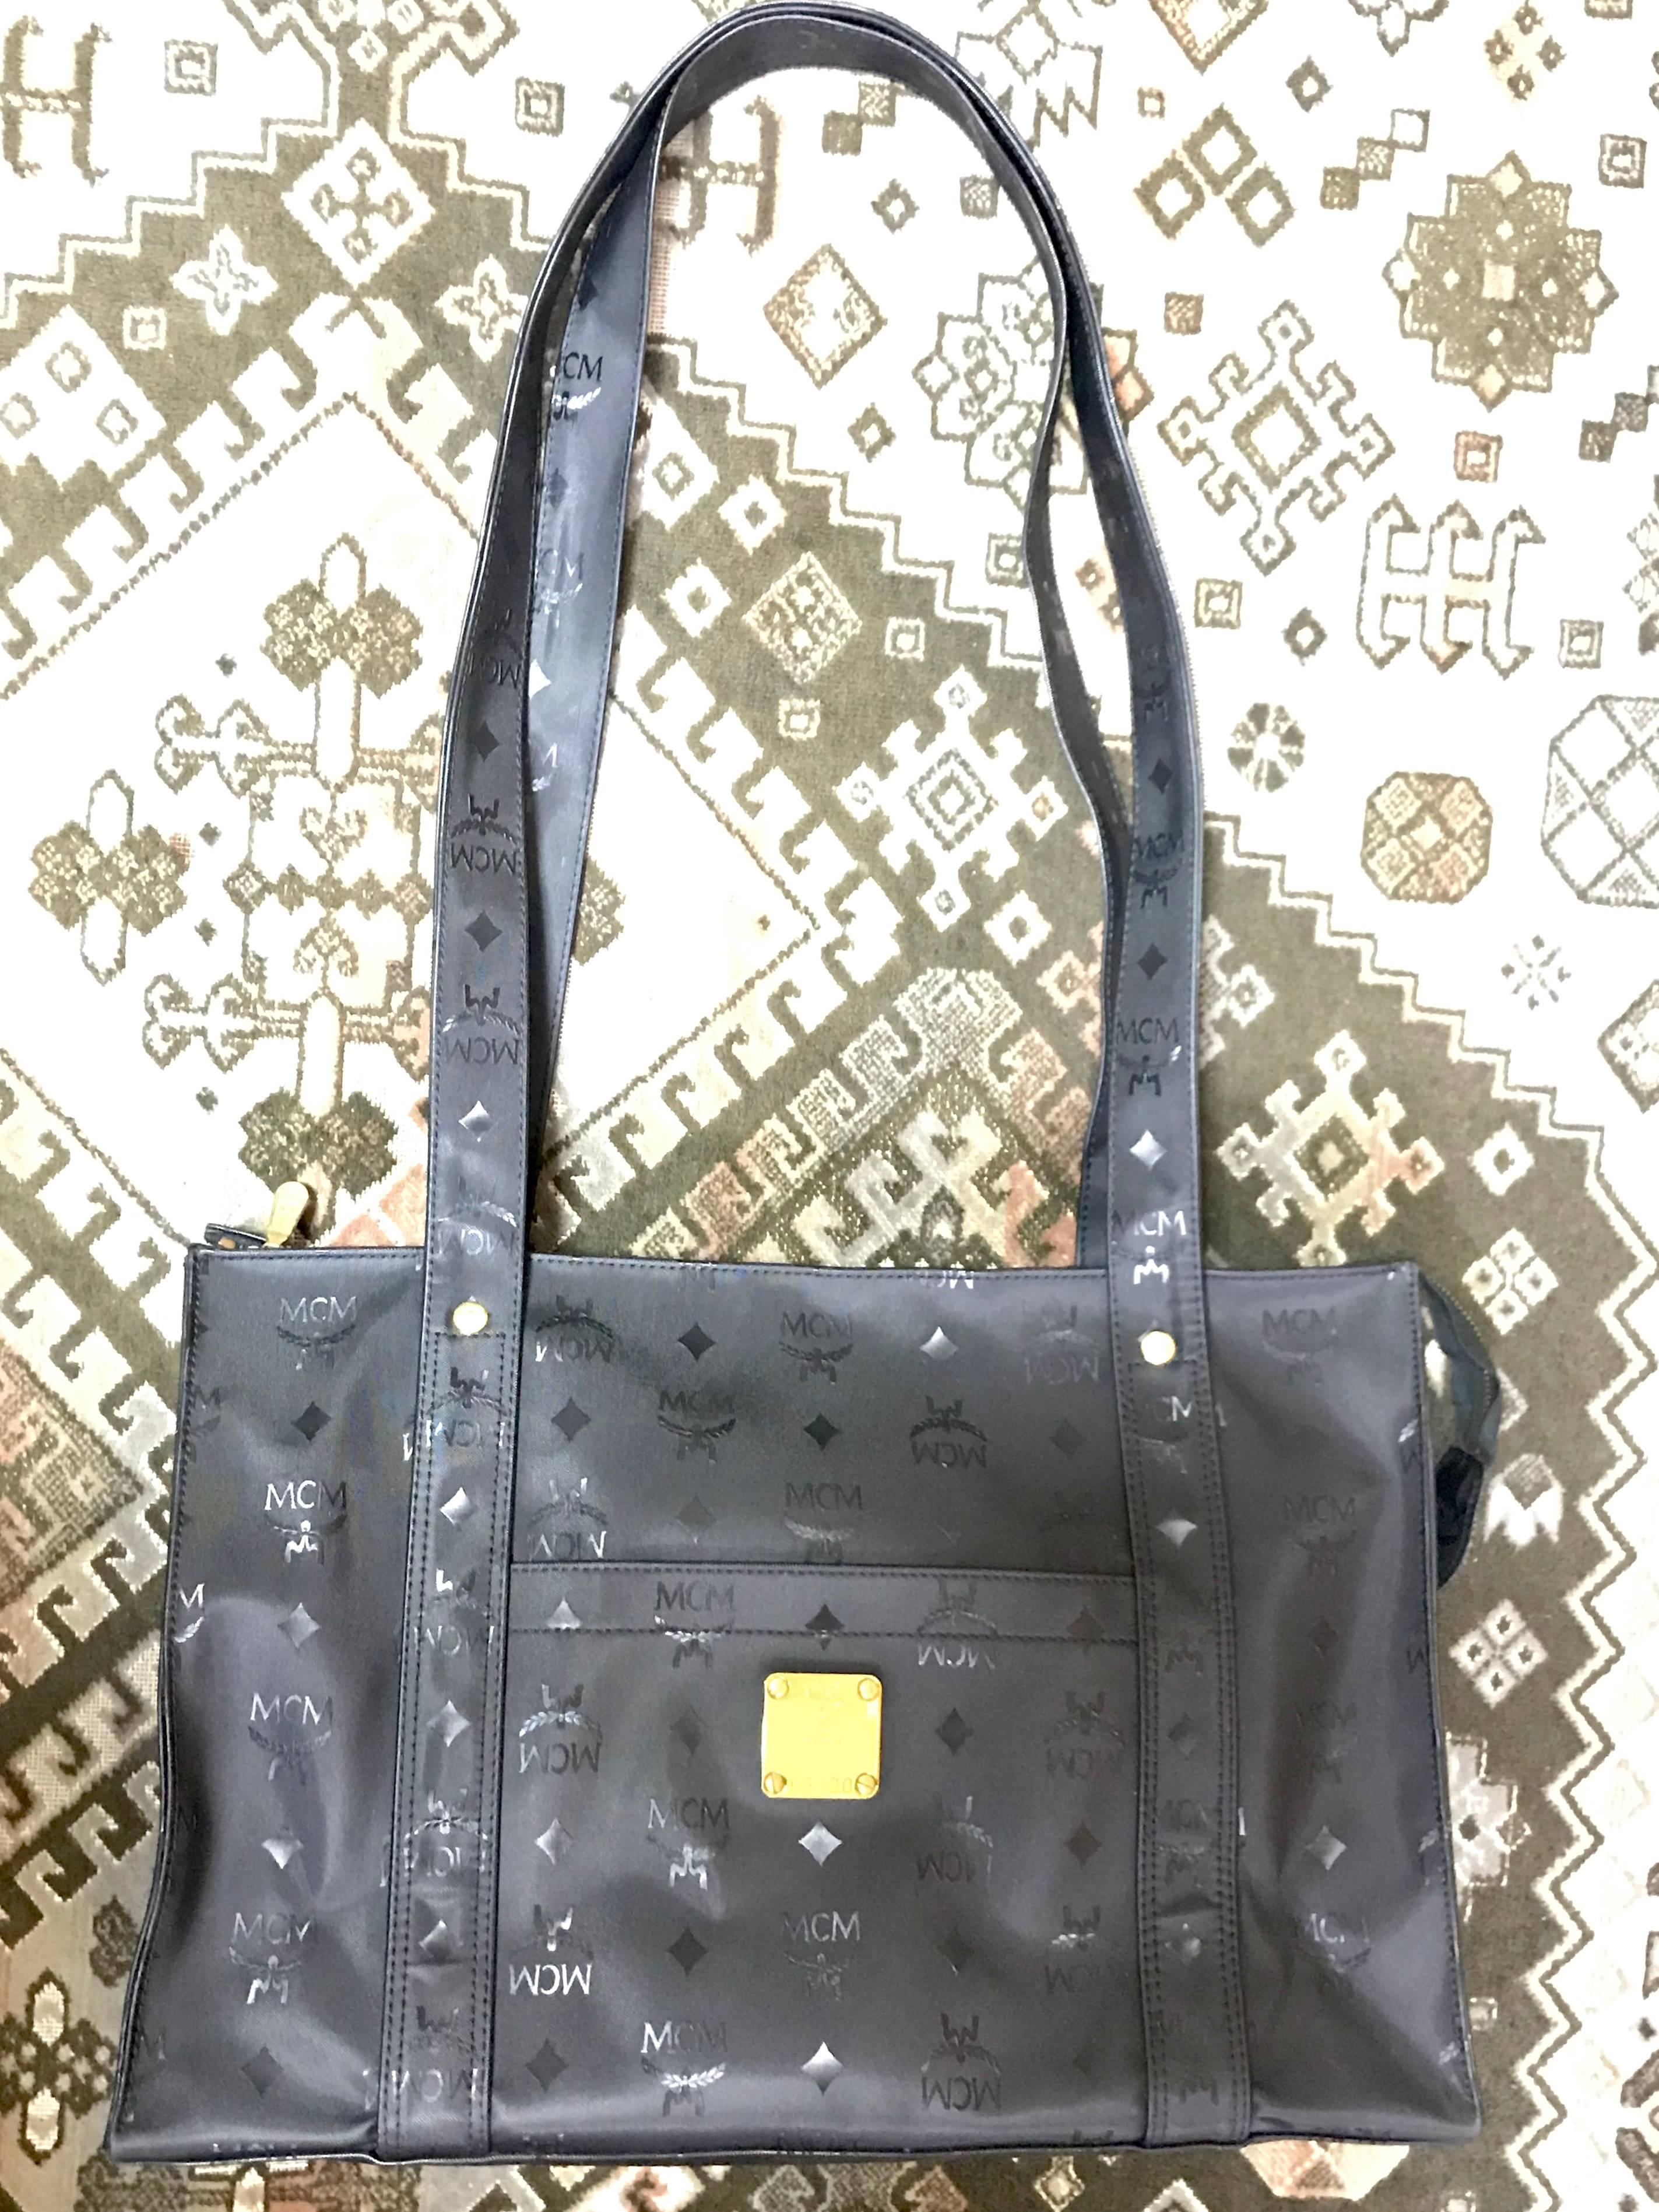 1990s. MINT. Vintage MCM black monogram large shopper tote bag, shoulder bag. Unisex use as classic style in originality. Handmade in Germany.

MCM has been back in the fashion trend again!!
Now it's considered to be one of the must-have designers